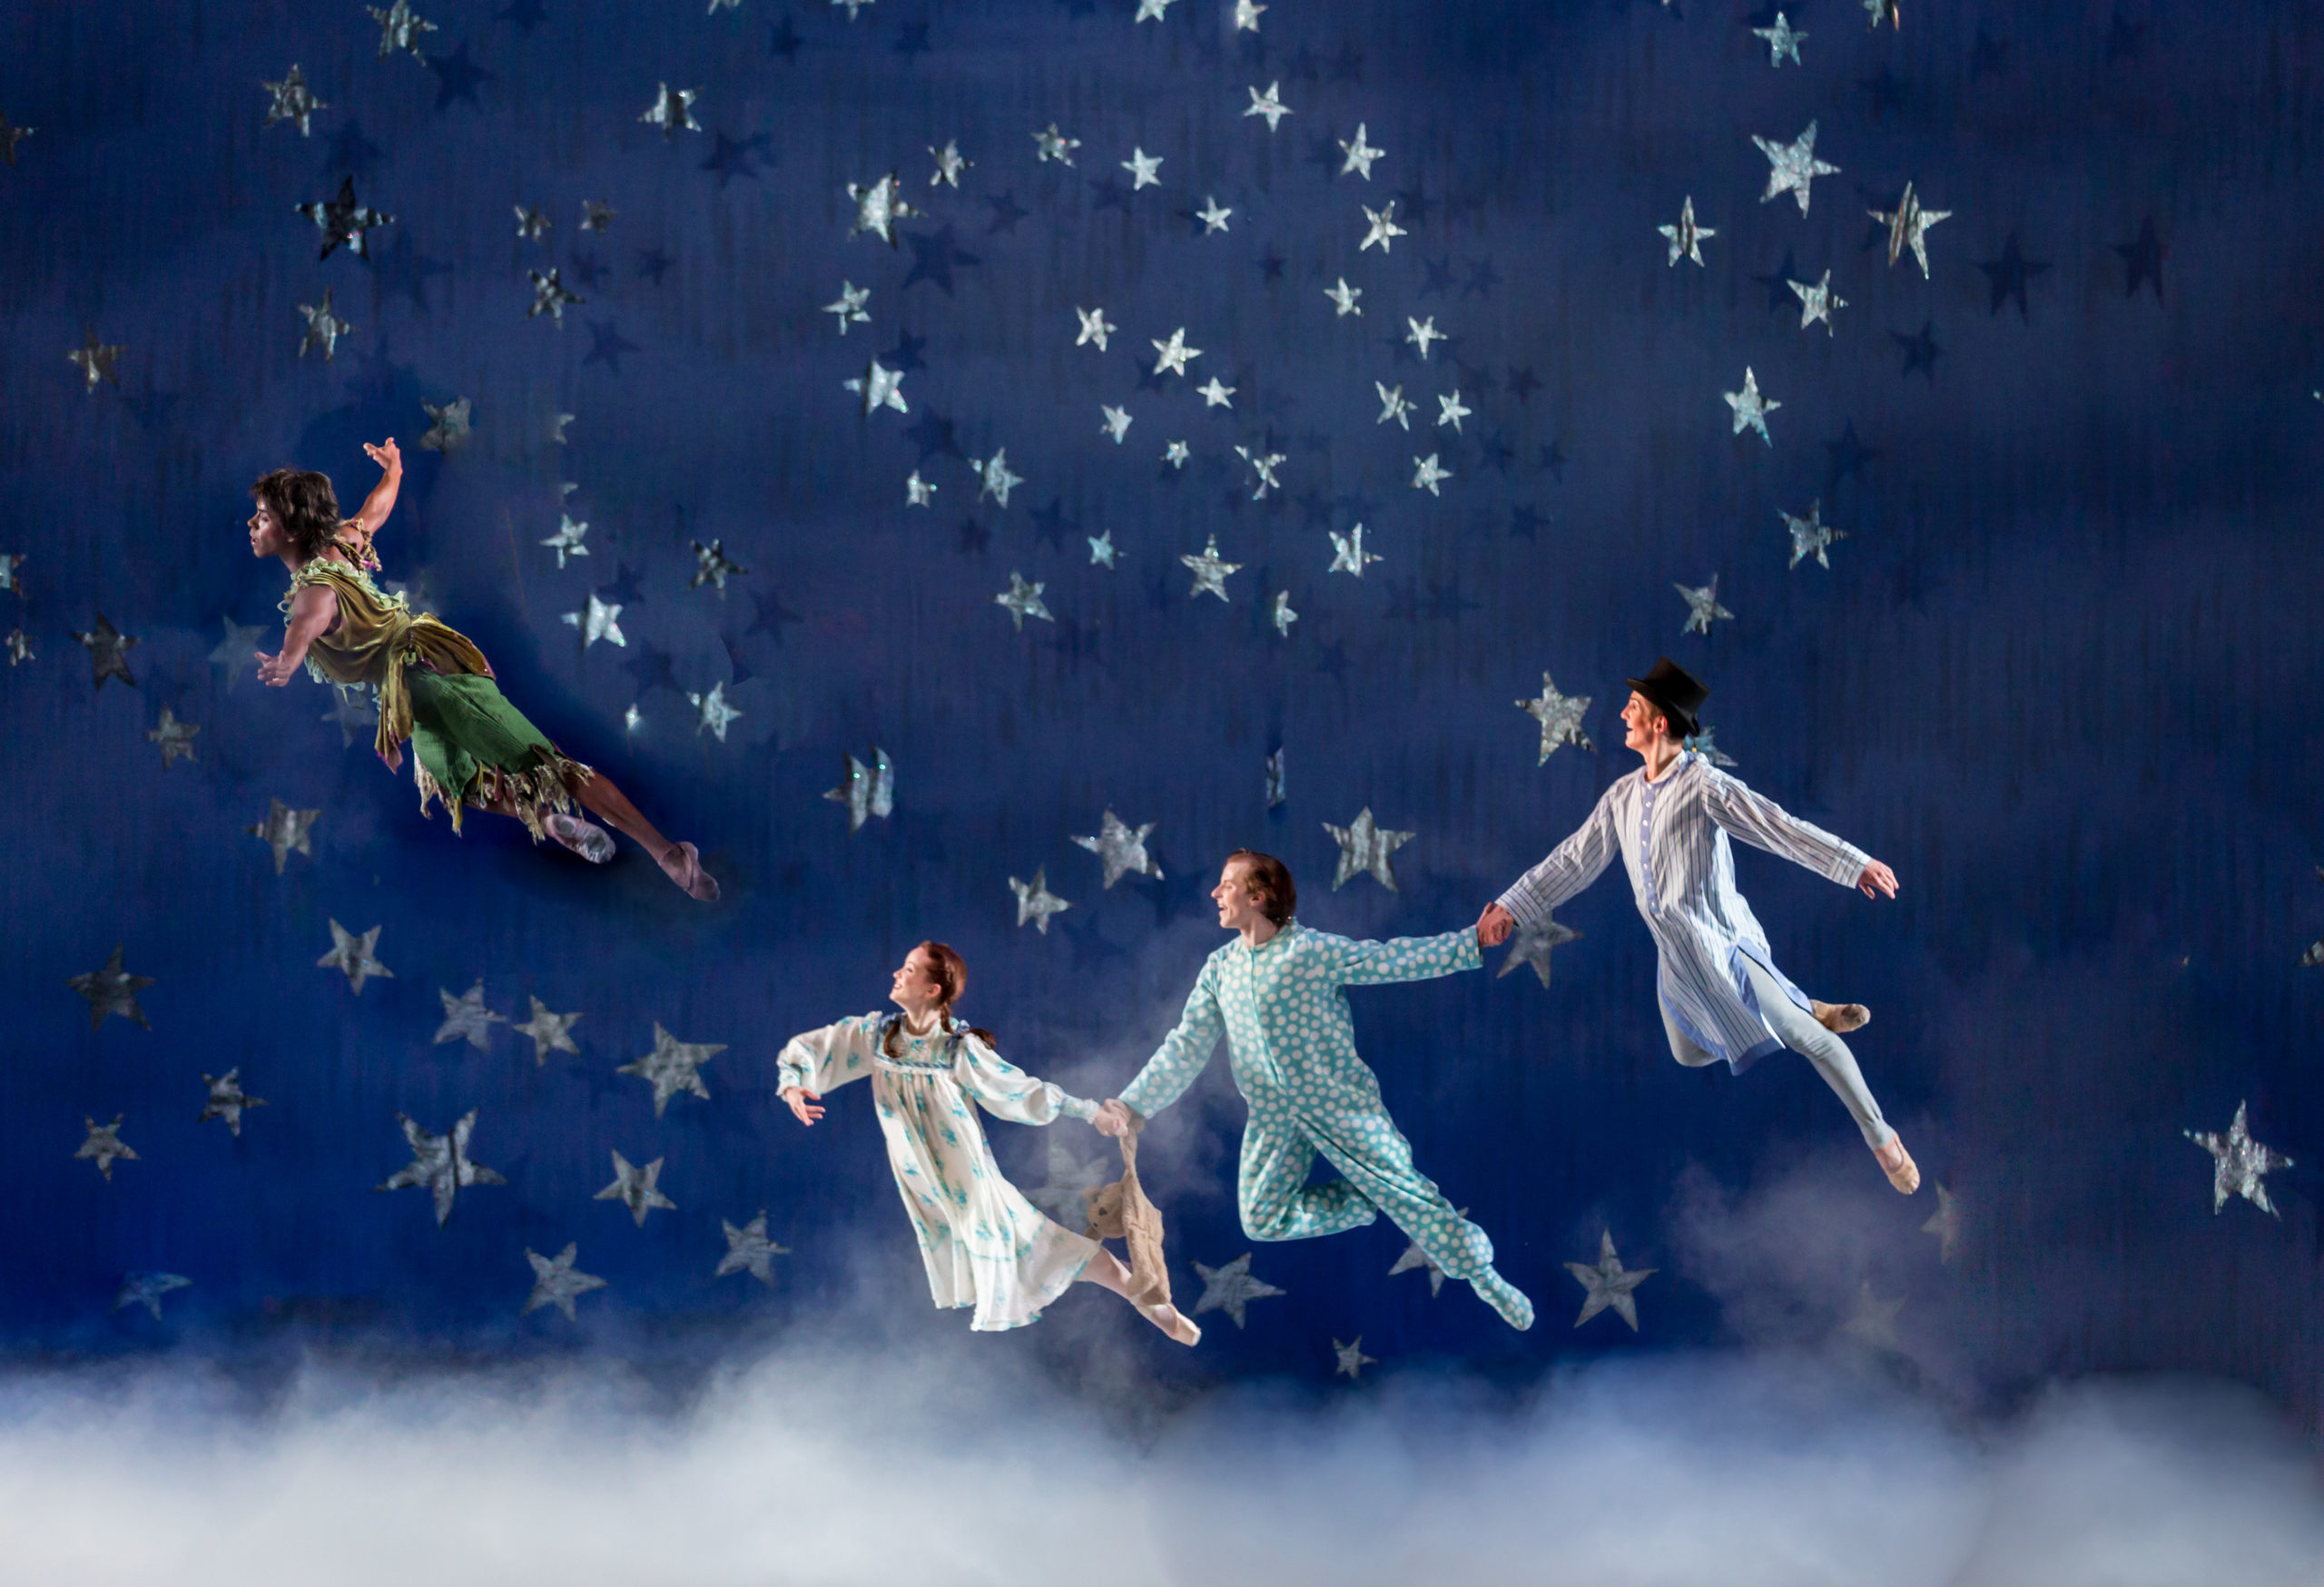 Three dancers dressed in costume as Peter Pan’s Wendy, Michael and John hold hands as they fly across a stage set with stars. Peter Pan also flies ahead of them.